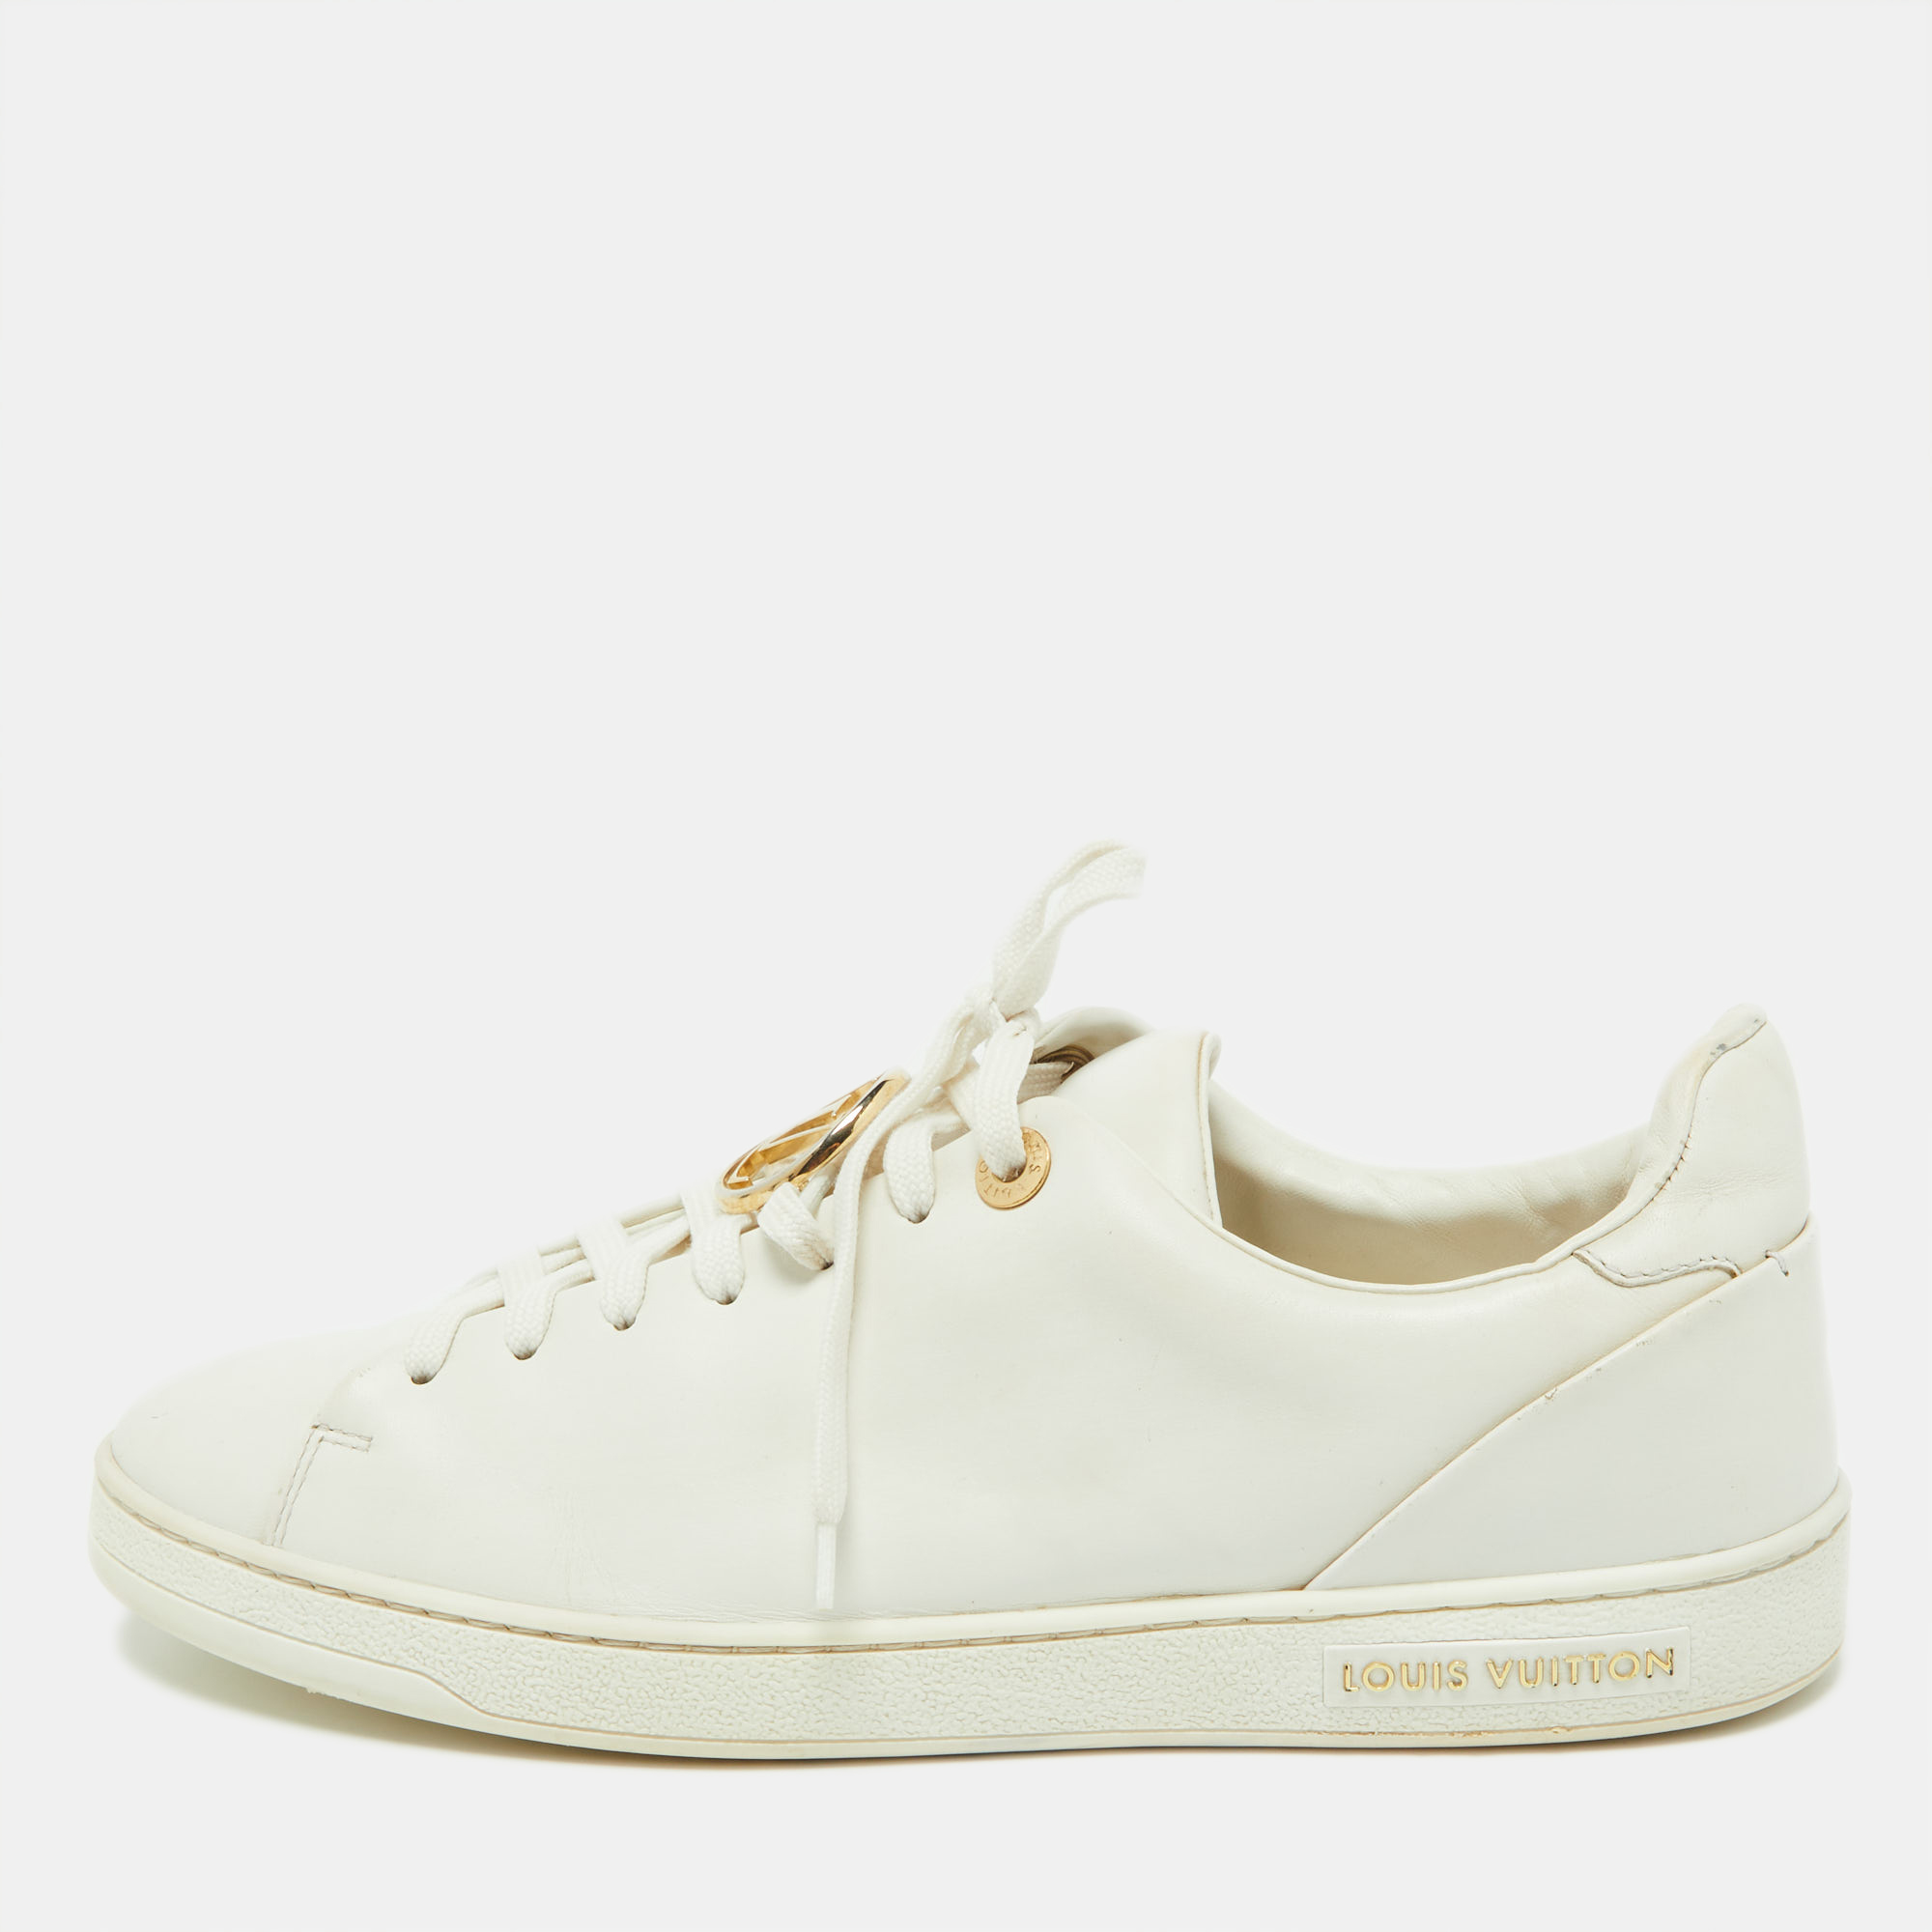 These Louis Vuitton sneakers are the ultimate step up to bring style and attitude to your look. They are crafted from leather and have a lovely white color. They have lace ups and durable rubber soles. Theyll look super chic with most casual outfits